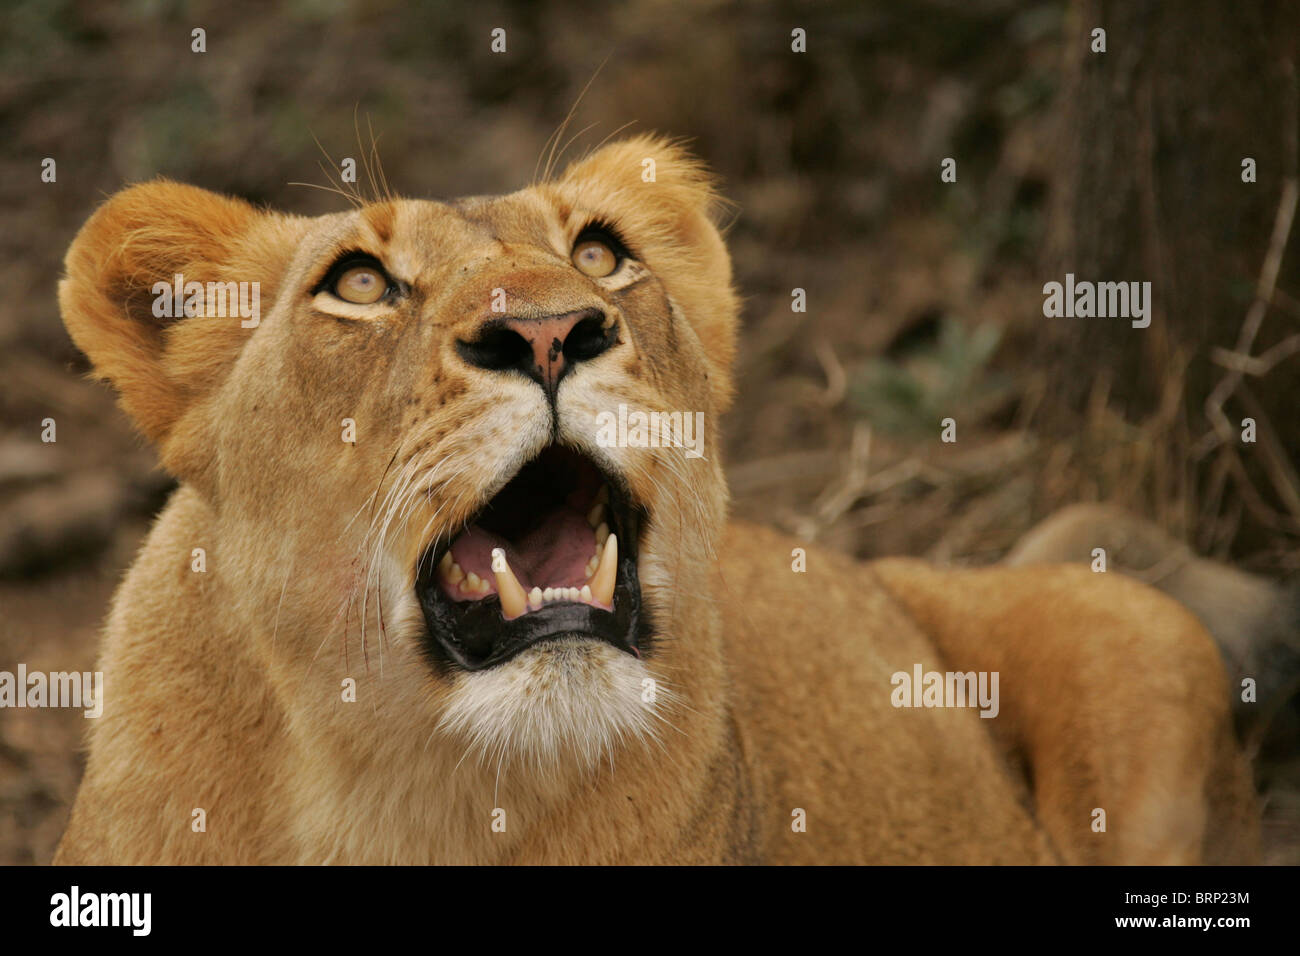 A portrait of an Lioness lying on the ground and looking skywards Stock Photo